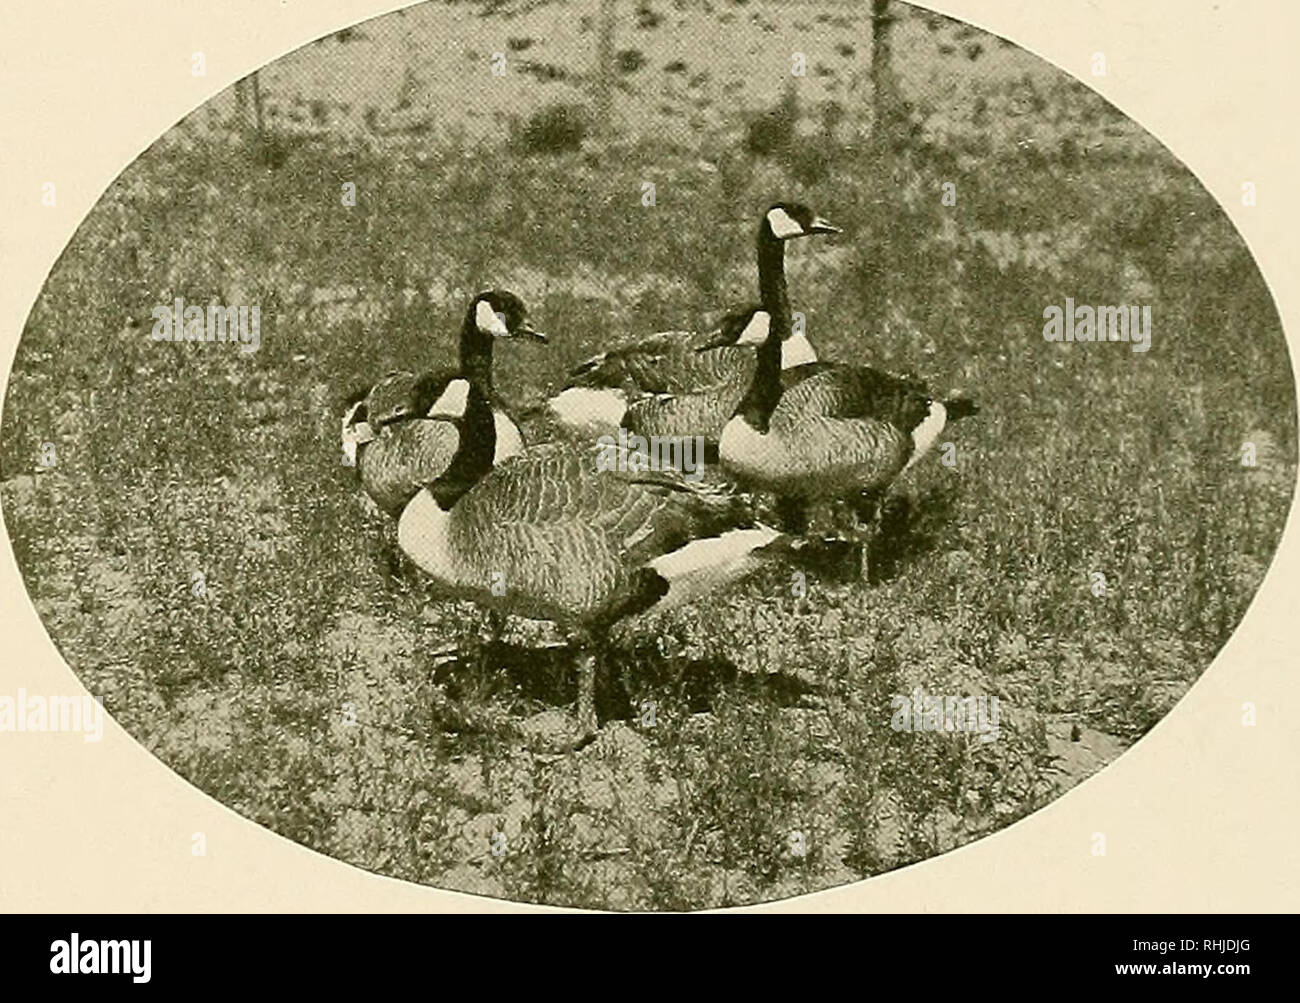 . The birds of California : a complete, scientific and popular account of the 580 species and subspecies of birds found in the state. Birds; Birds. The Canada Geese Authorities.—Gambel {Anser canadensis), Jour. Acad. Nat. Sci. Phila., ser. 2, i., 1849, p. 225 (Ca.Ul.); Belding, Zoe, vol. iii., 1892, pp. 99, 100 (occurrence in Calif.); Ray, Condor, vol. xiv., 1912, p. 67, figs, (nesting at Lake Tahoe; desc. habits, nest and eggs); Swarth, Univ. Calif. Publ. Zool., vol. xii., 1913, p. I, figs, (occurrence in Calif.; crit., desc, meas., etc.). HONK, honk—honk, honk! What a stirring sound is that  Stock Photo